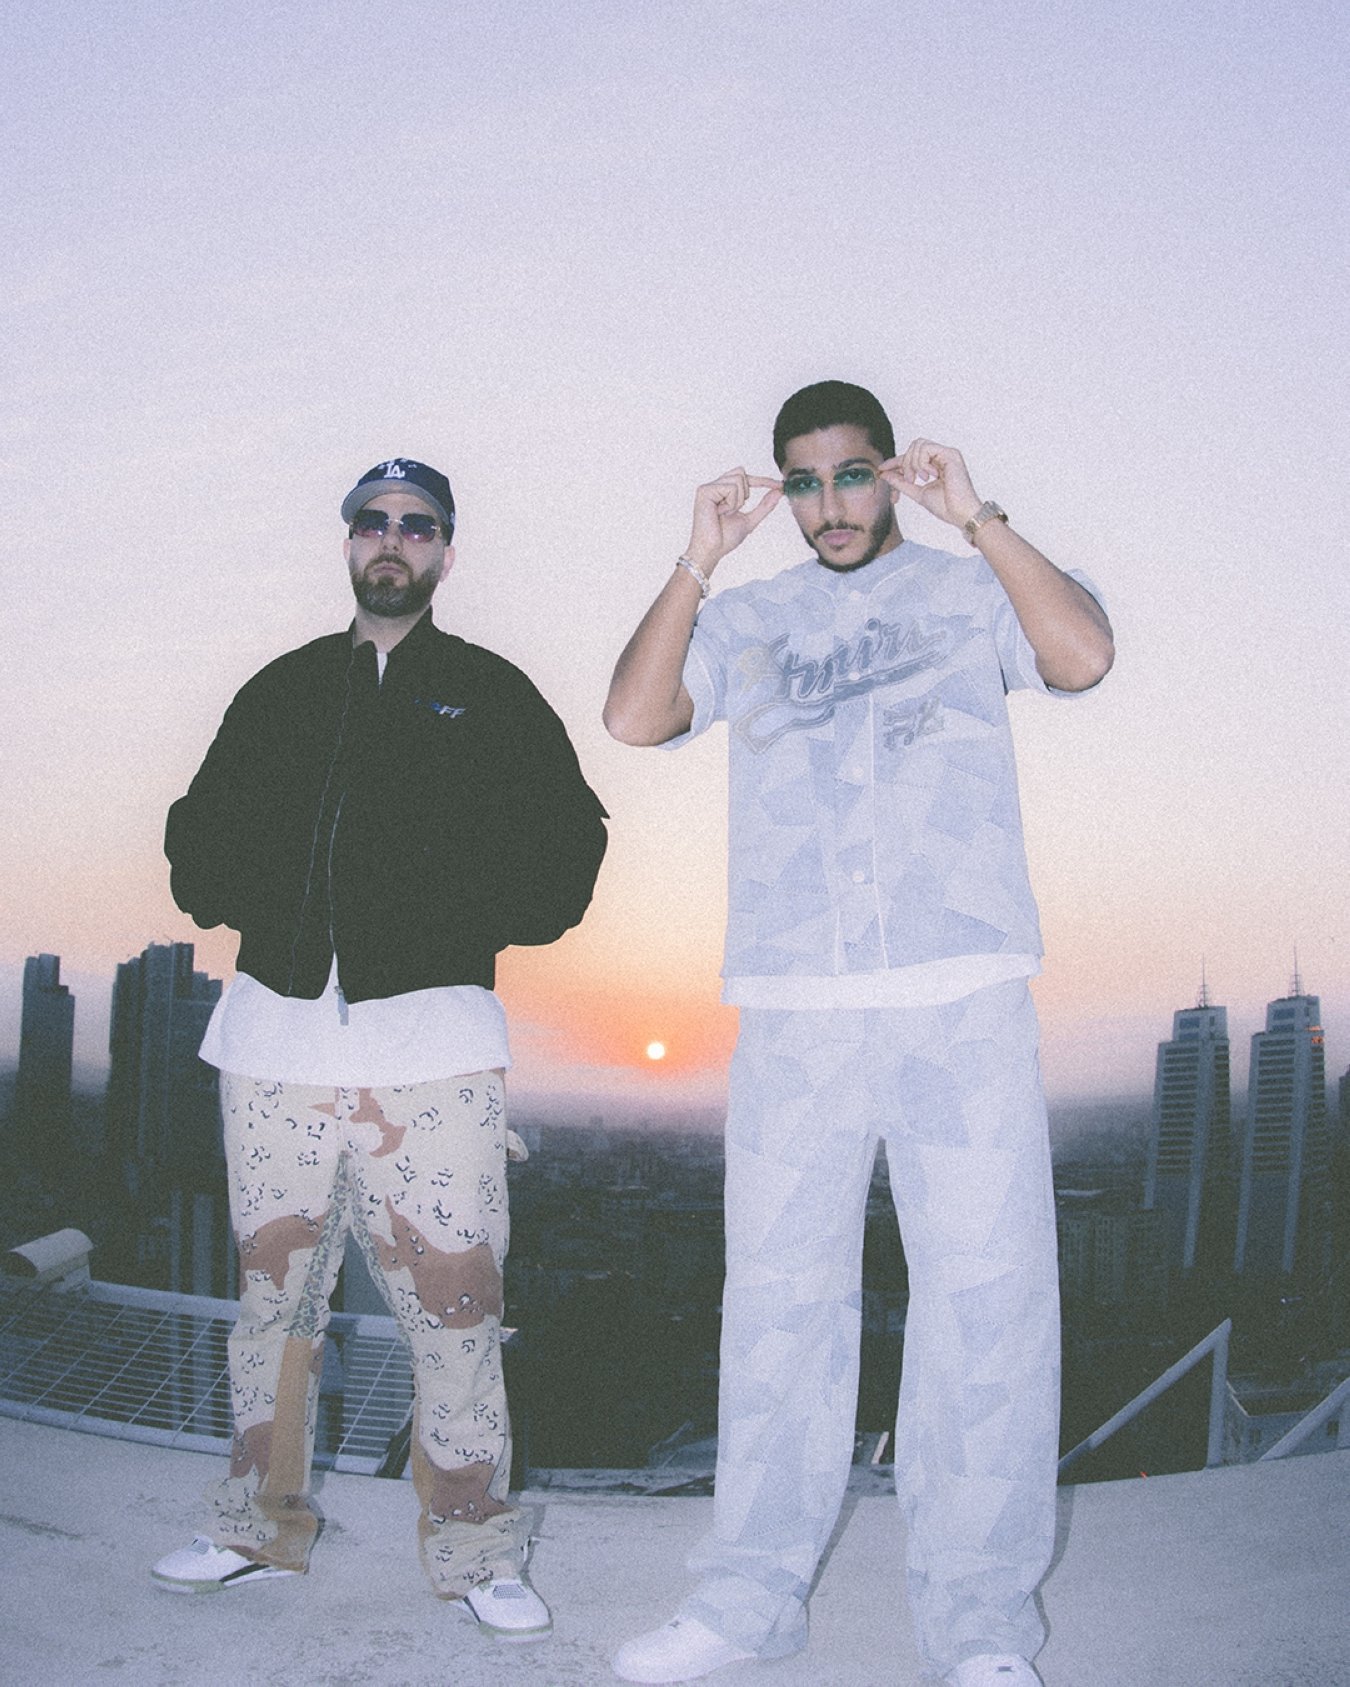 Murda (L) and MERO pose during the single&#039;s shooting. (Photo by Hakan Uç)